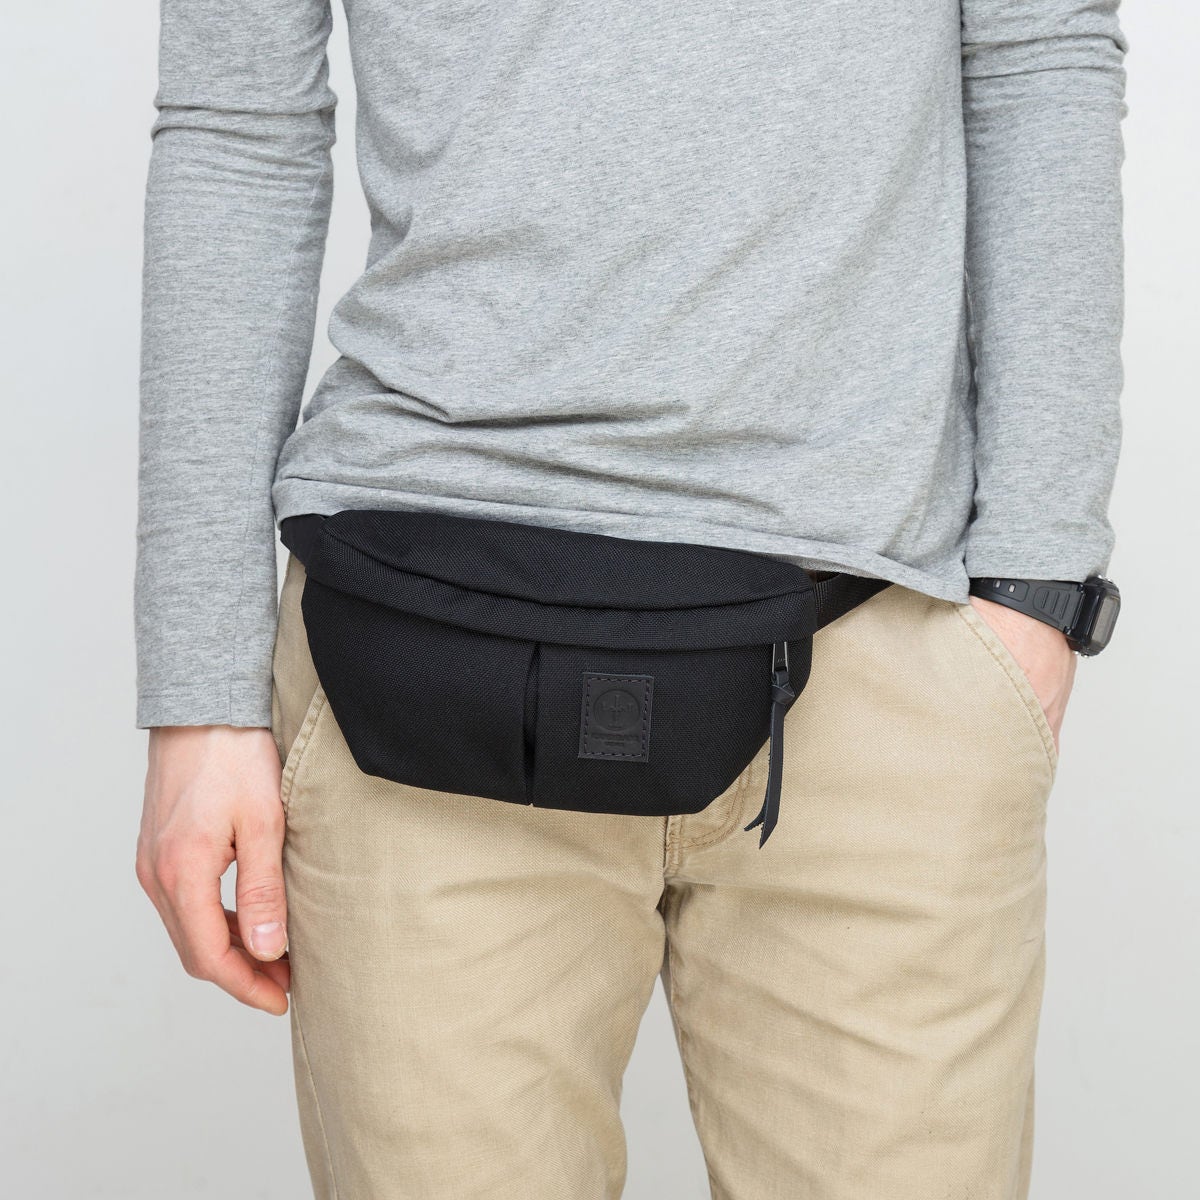 Total Black Fanny pack Hip pack Waist pack Leather fanny pack